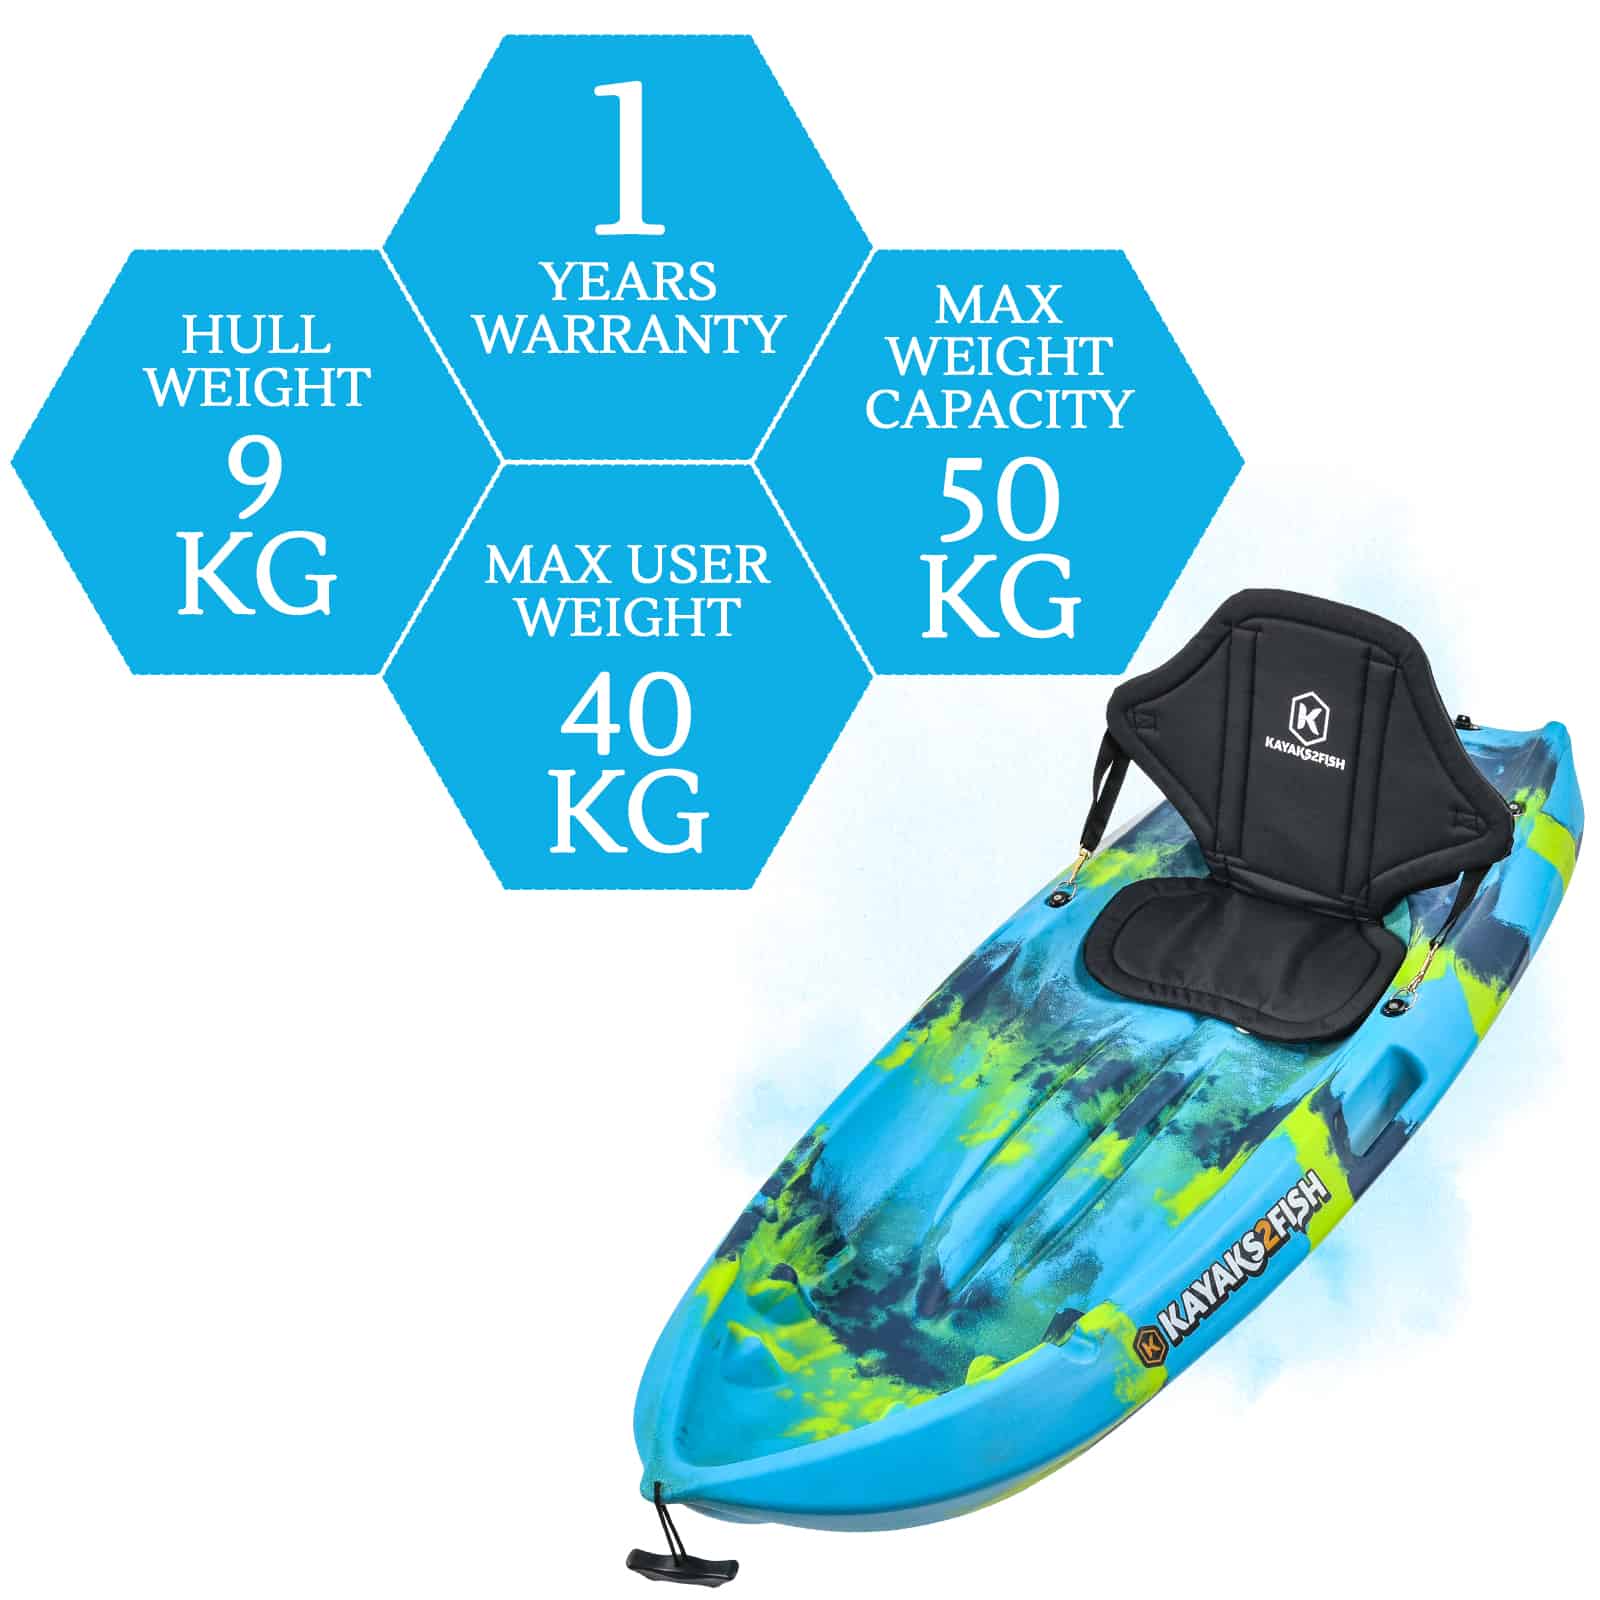 K2FP-PUFFIN-SEASPRAY specifications